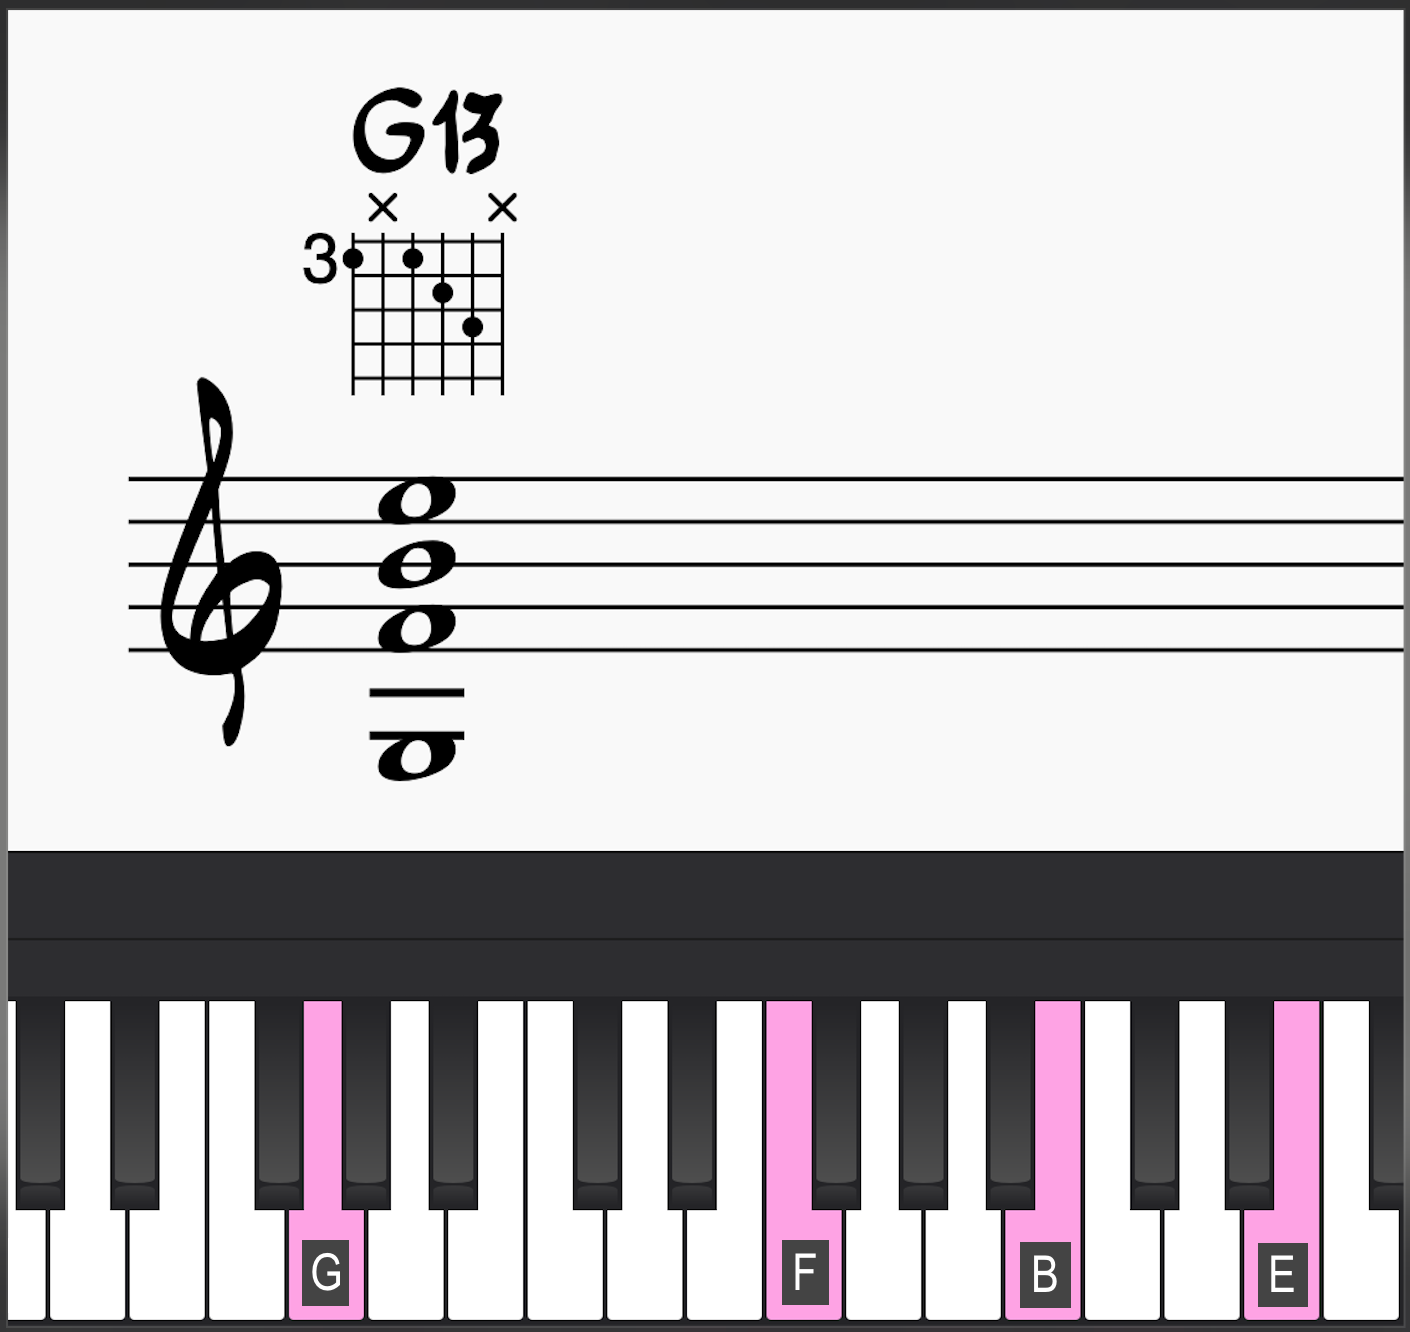 G13 blues chord on piano and guitar 